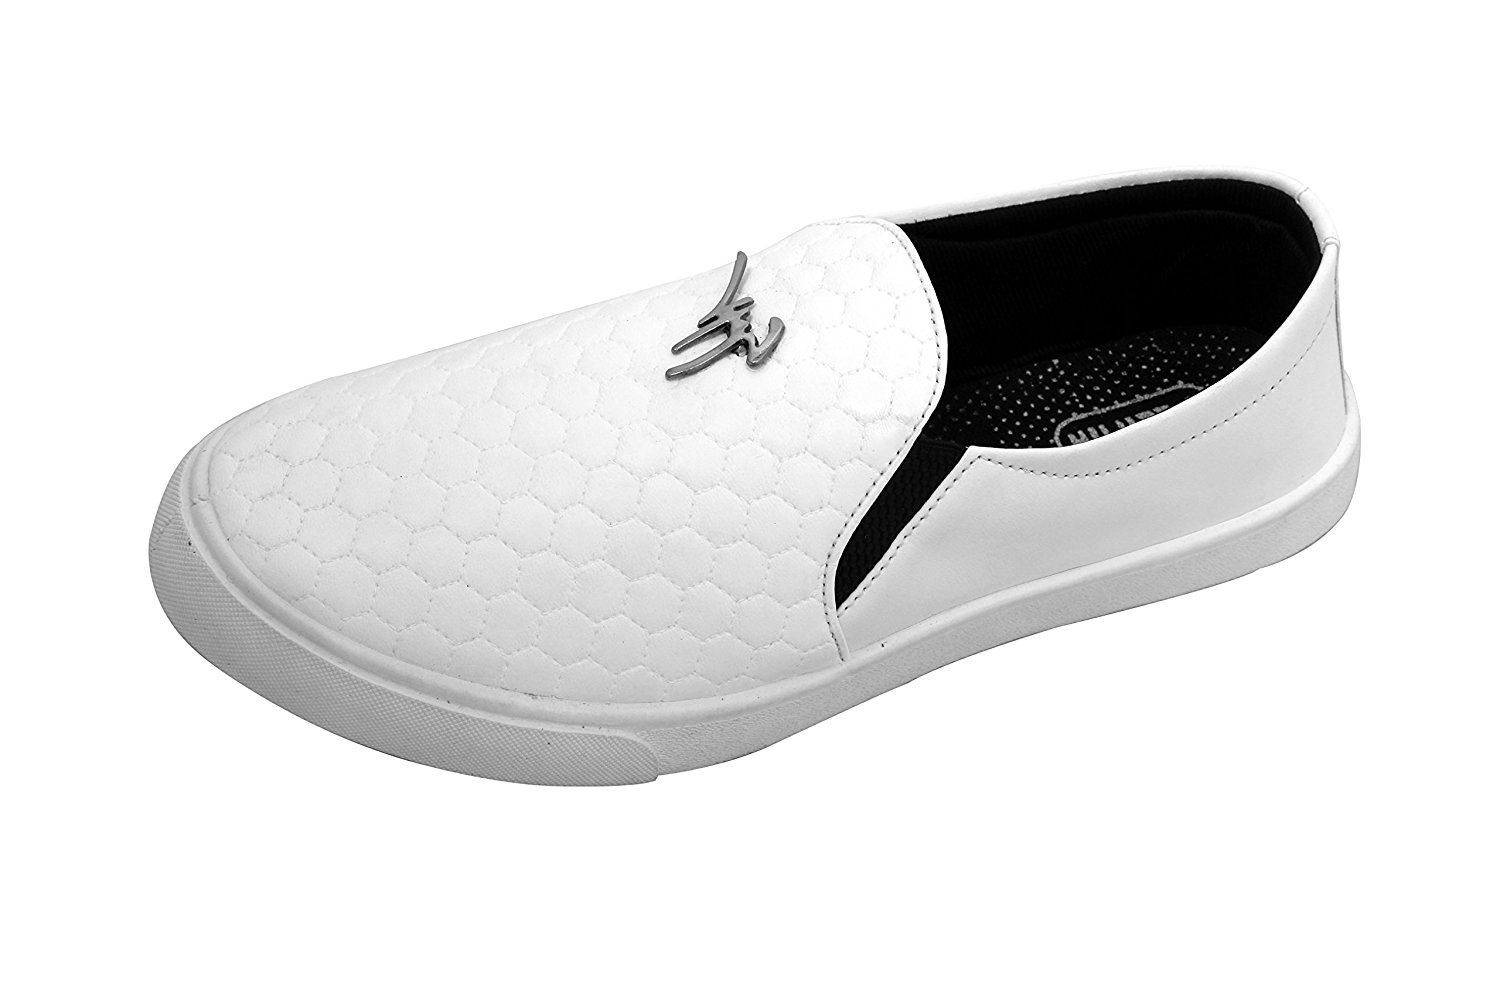 Amazon: Buy Ethics Classic Men’s White & Black Sneakers for Rs 199 only